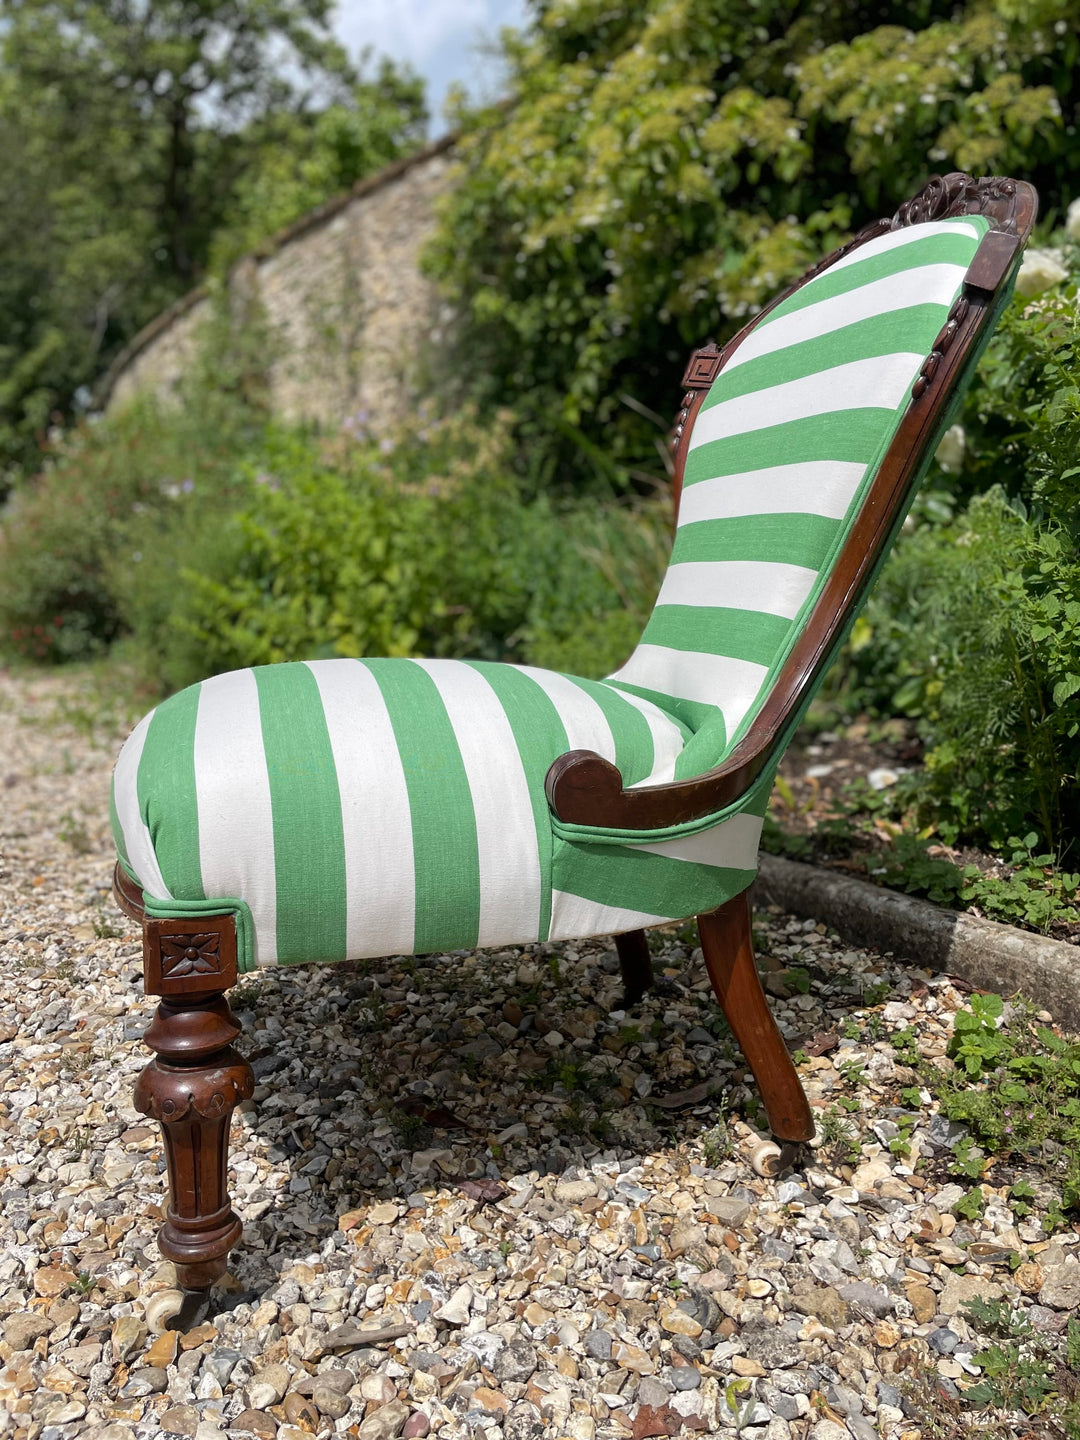 Aggy-Antique-Vintage-Nursing-chair-upcycled-strip-fabric-the-stripe-company-pole-vault-green-white-stripe-chair-